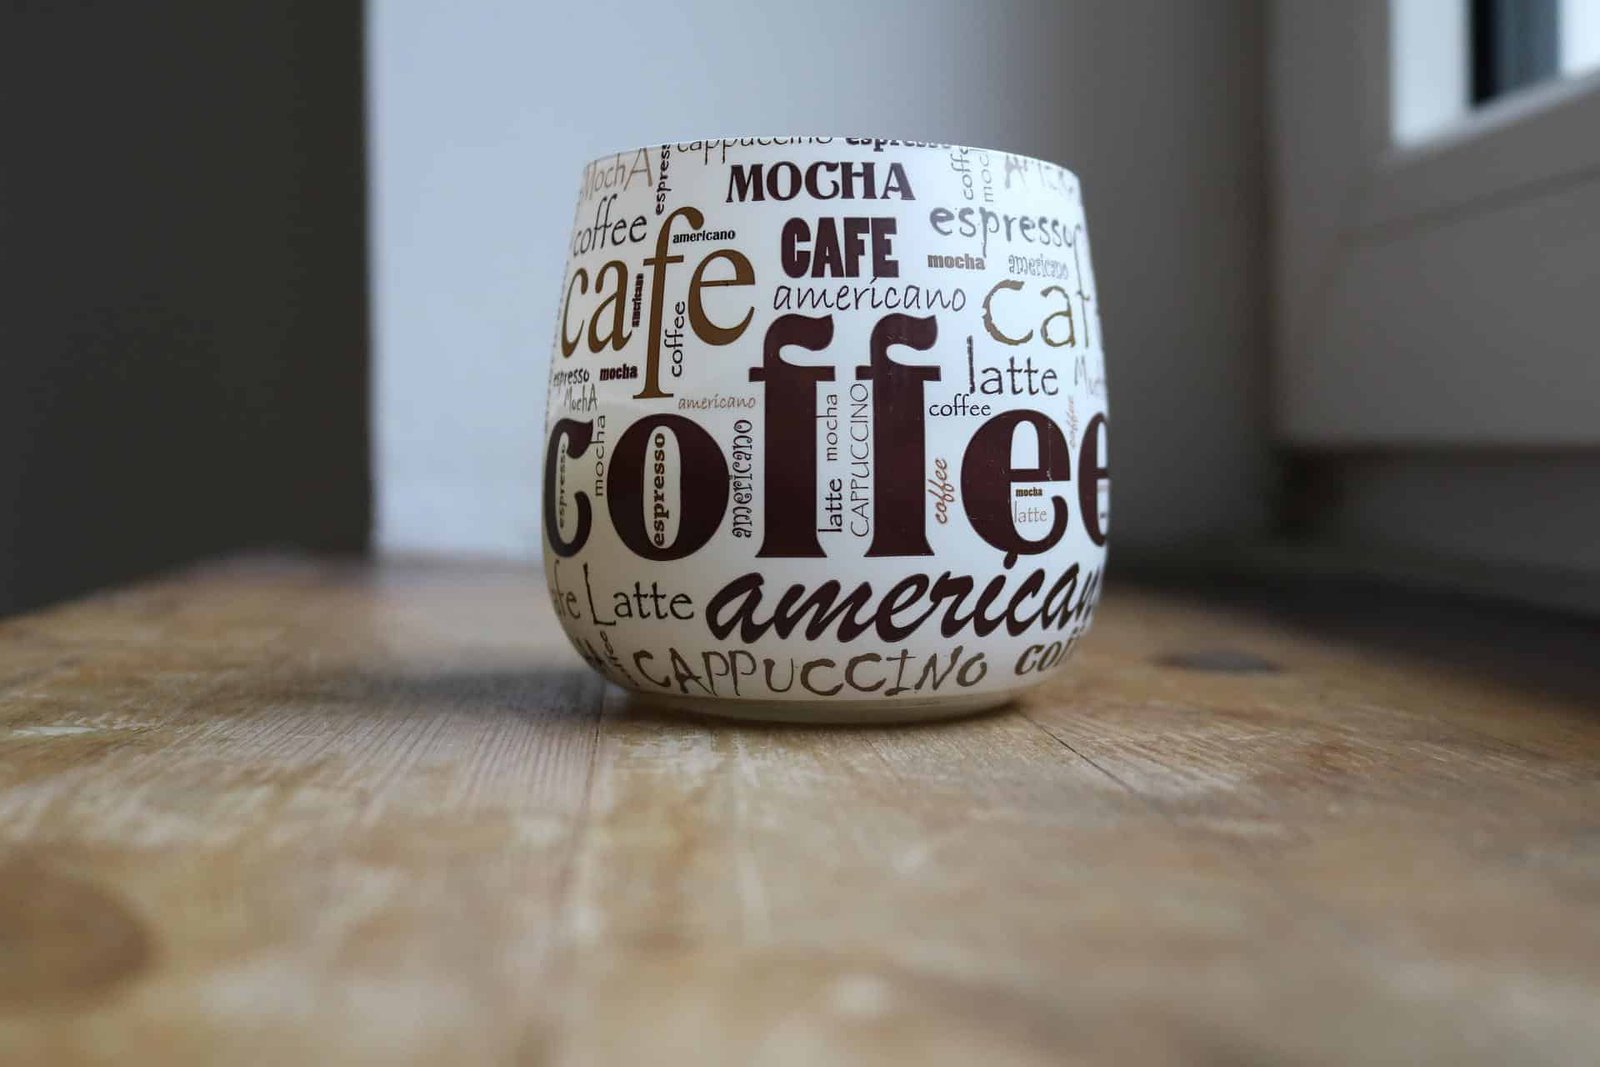 A cup with different types of coffee names written on it. Different types of coffee have different caffeine levels